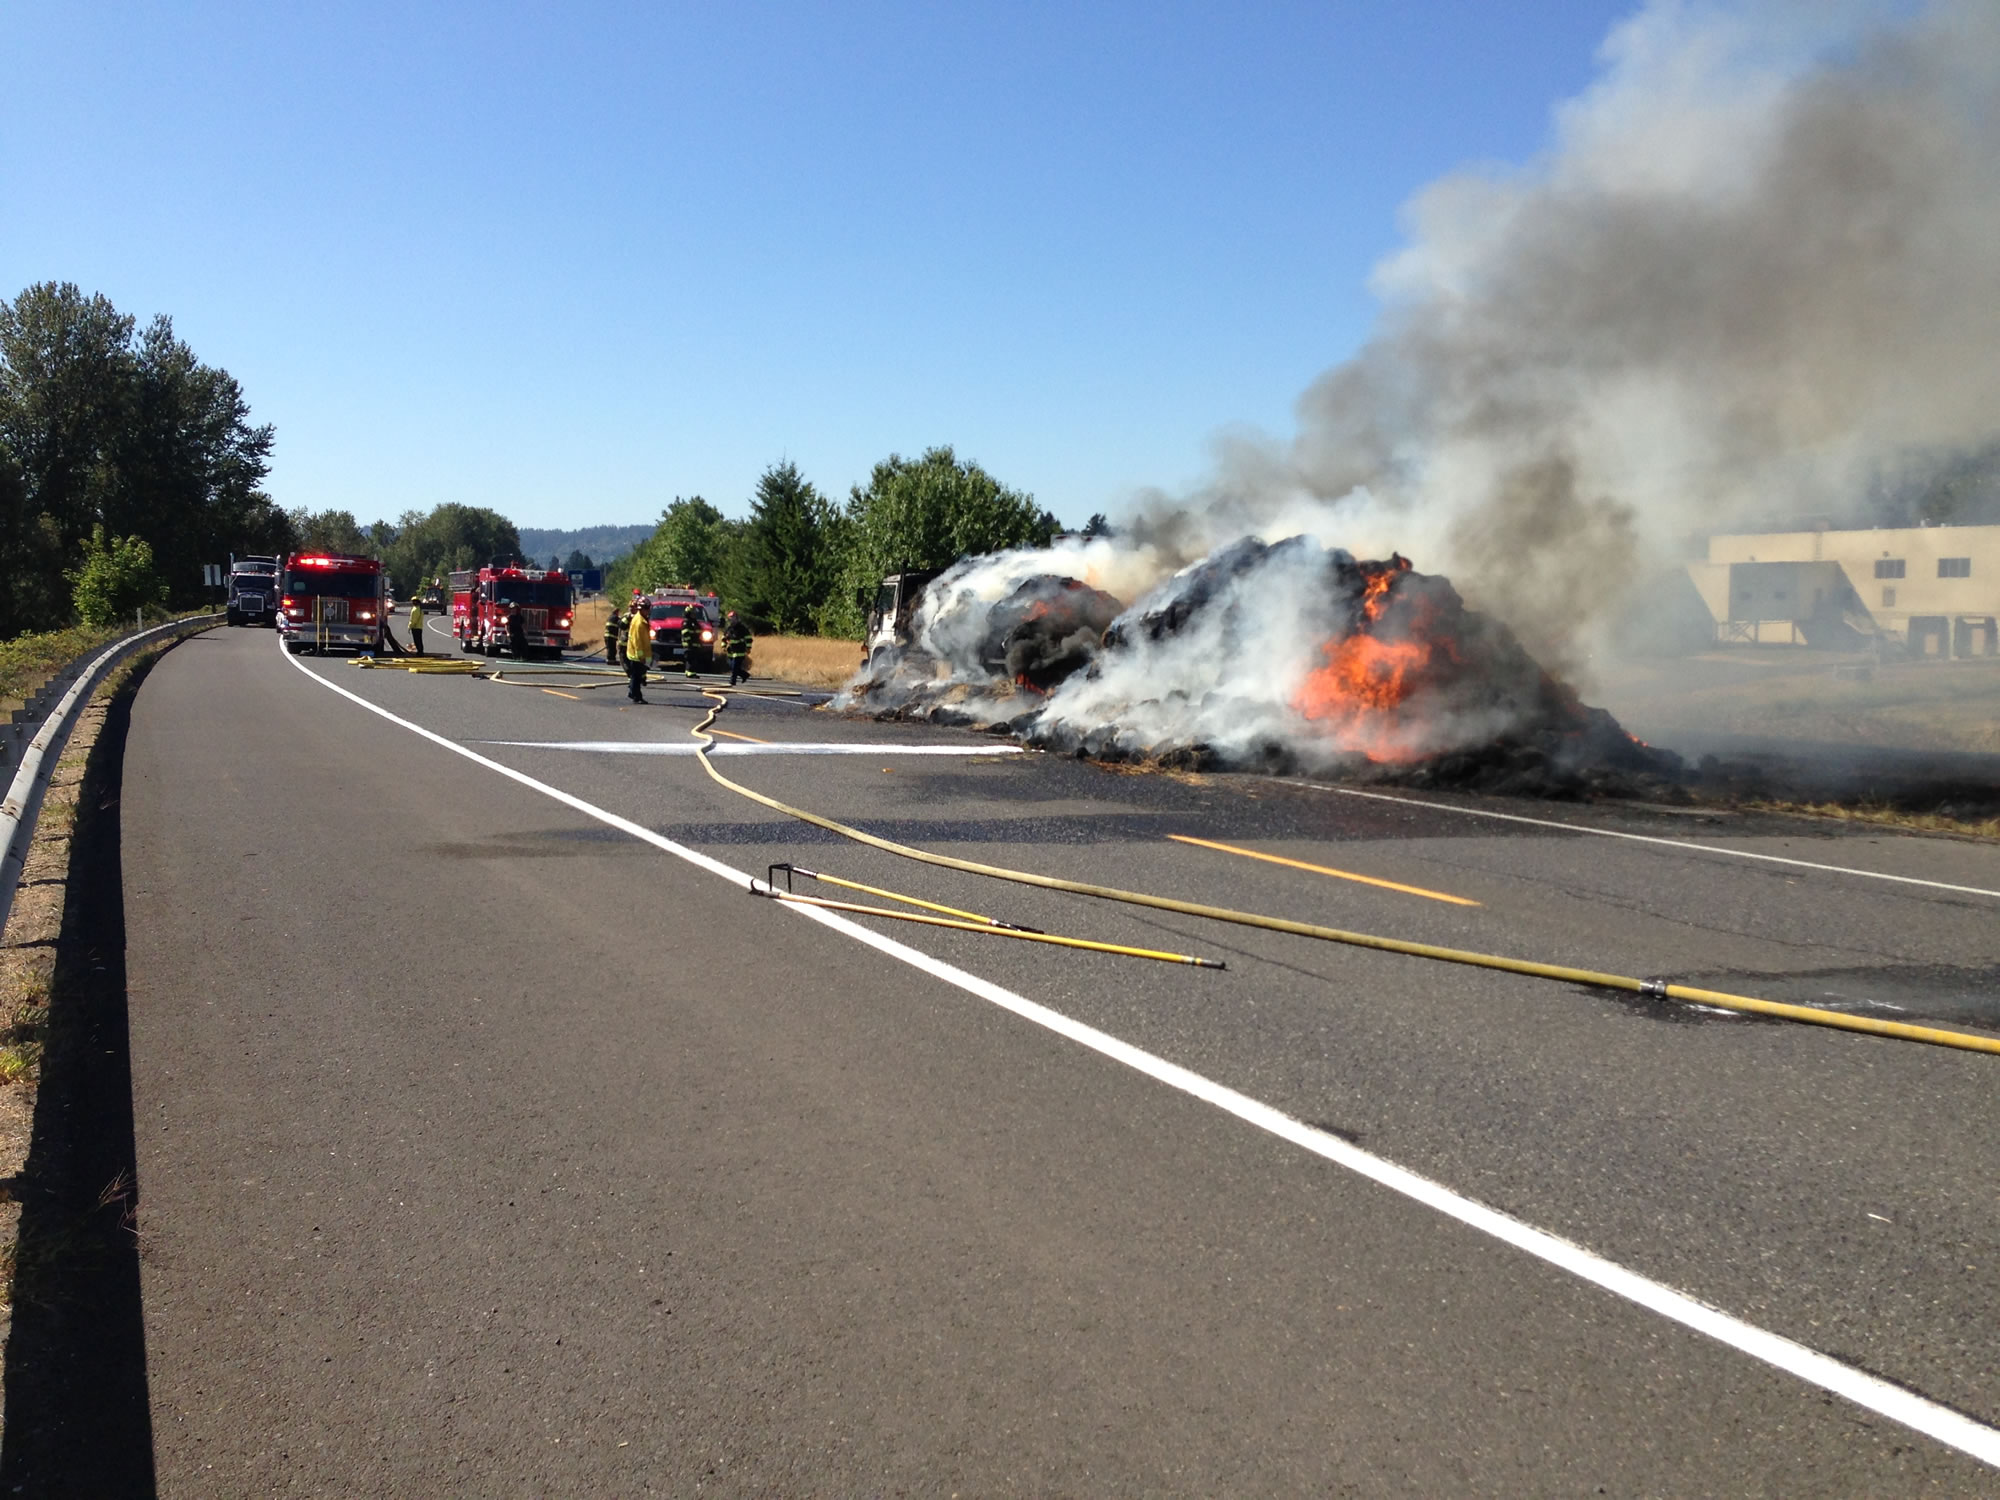 Fire personnel are working to contain a grass fire that appears to have started from a hay truck that caught fire along state Highway 14 in Washougal.